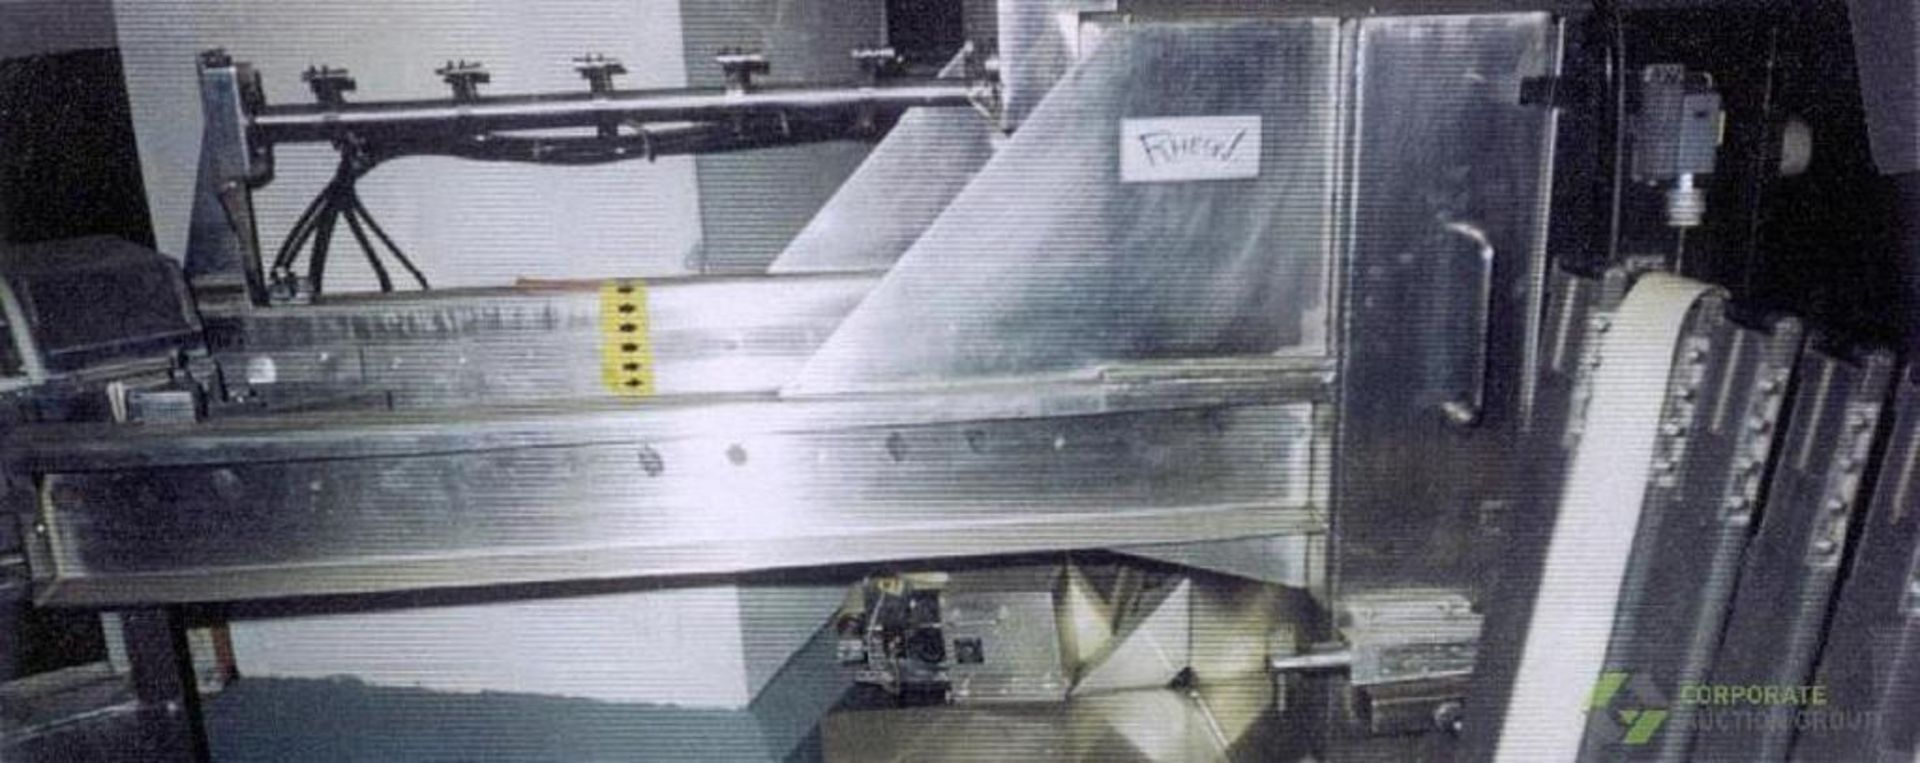 1987 Rheon Laminator/Sheeter, Model: MM 303, S/N: 97, 7.985kw motor, Includes Extruder capable of 30 - Image 4 of 13